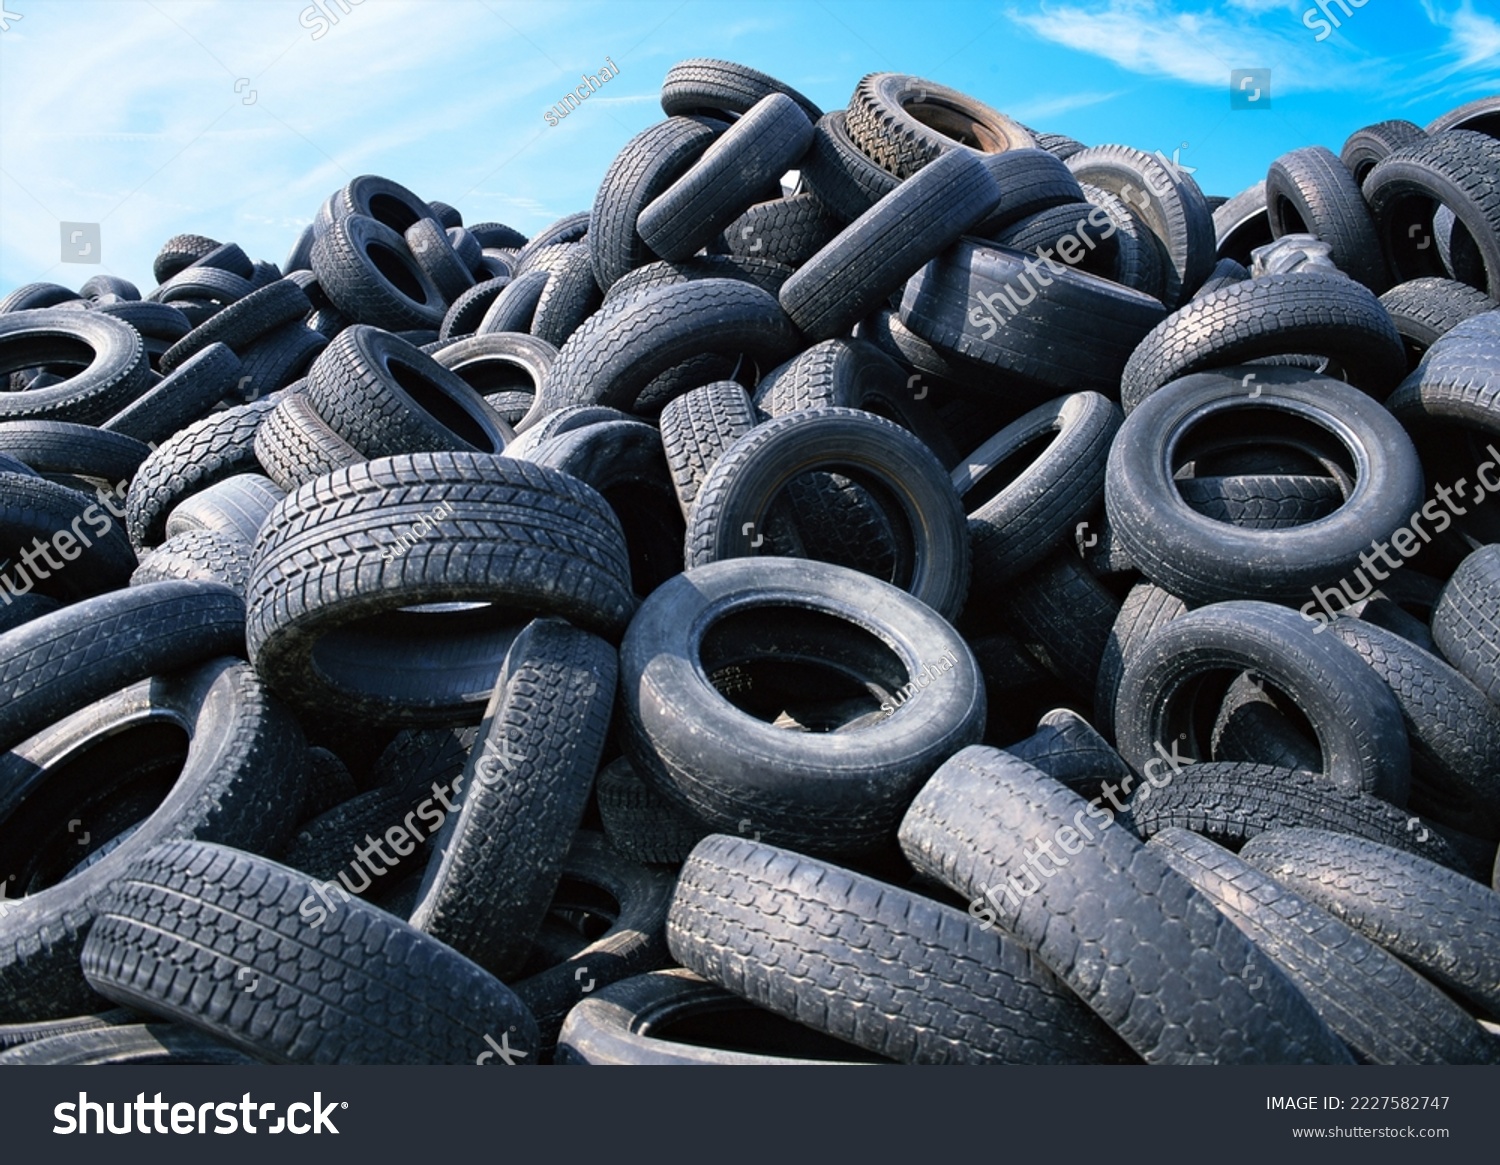 Landfill with old tires and tyres for recycling, Reuse of the waste rubber tyres, Disposal of waste tires, Worn out wheels for recycling, Tyre dump burning plant, Regenerated tire rubber. #2227582747